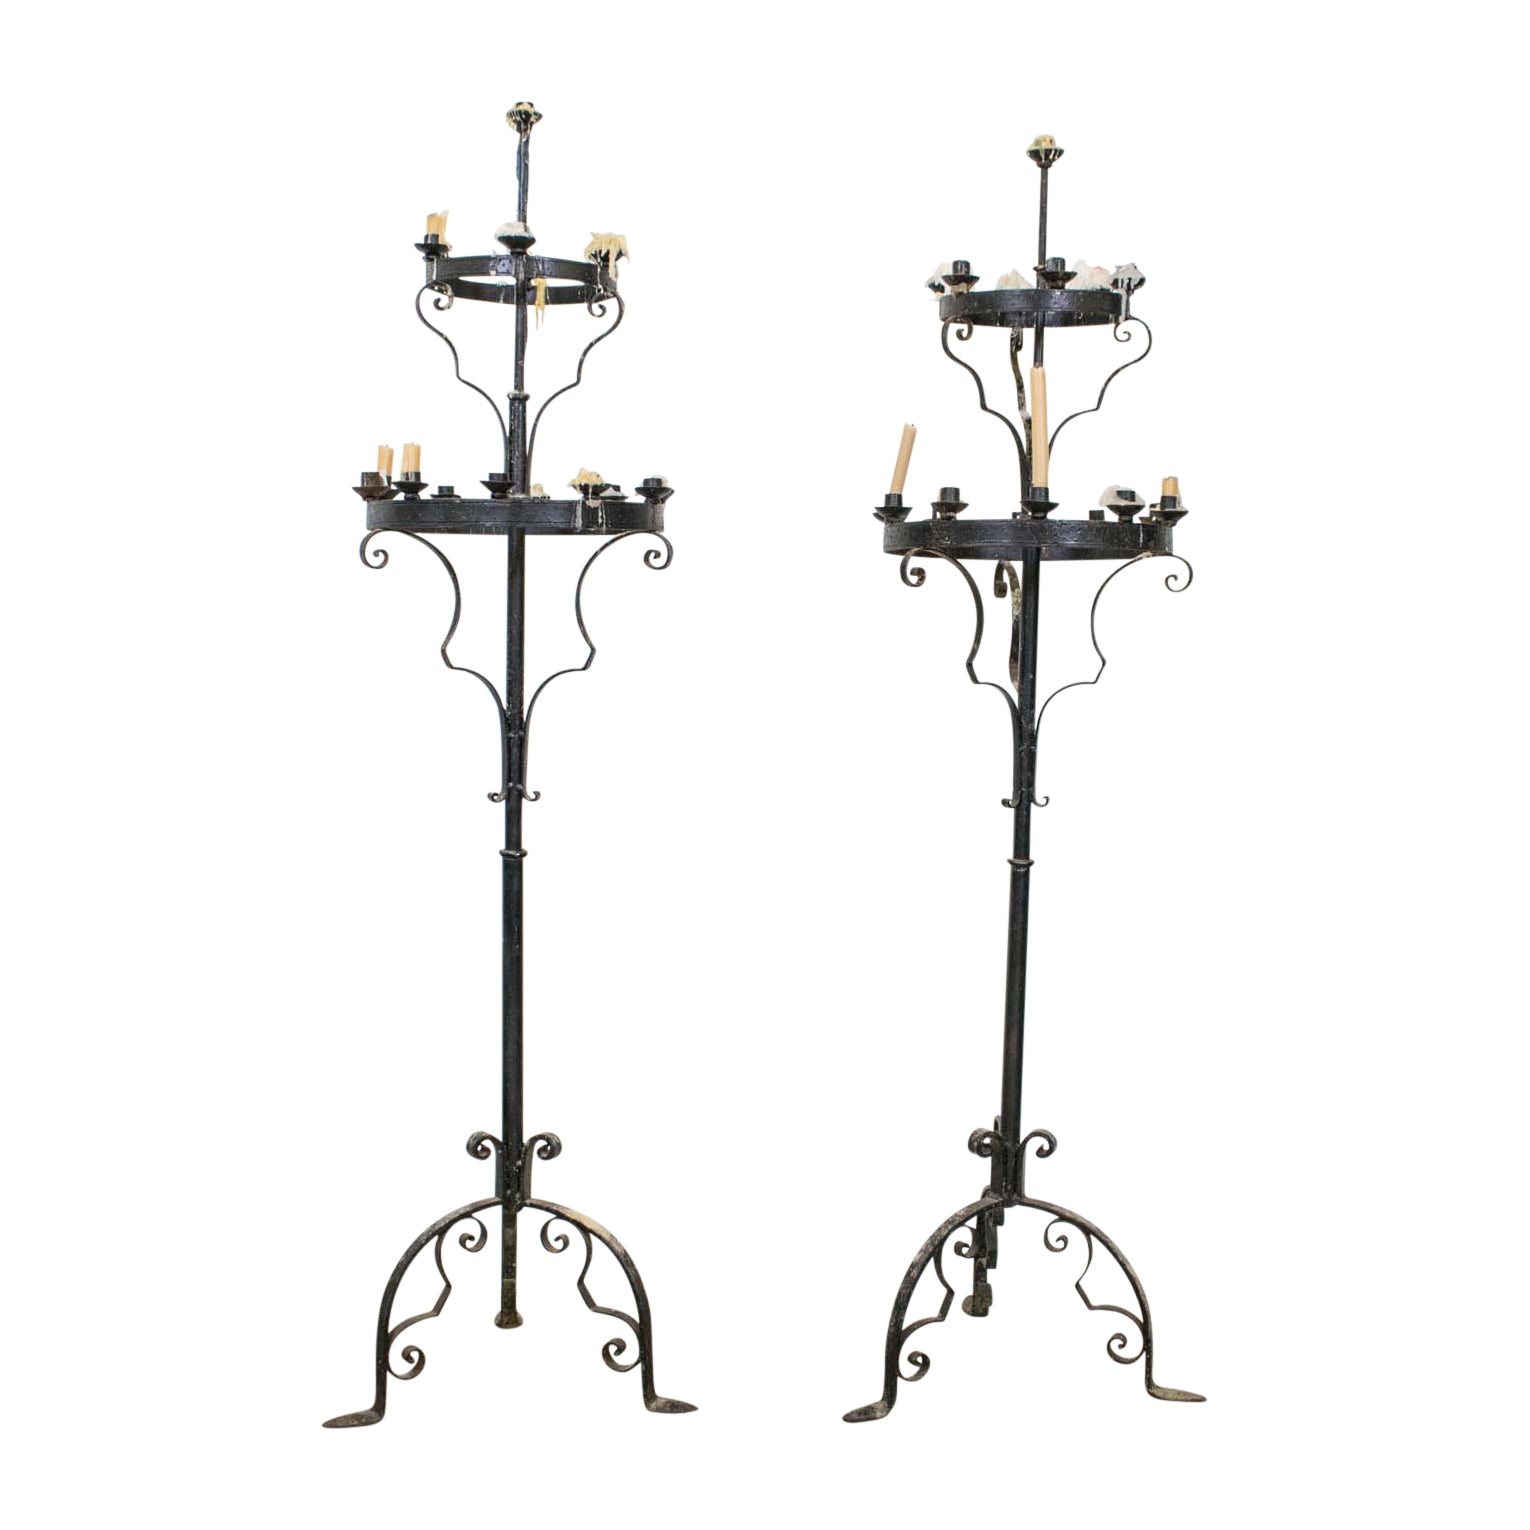 A Pair of Black Painted Wrought Iron Candle Sticks